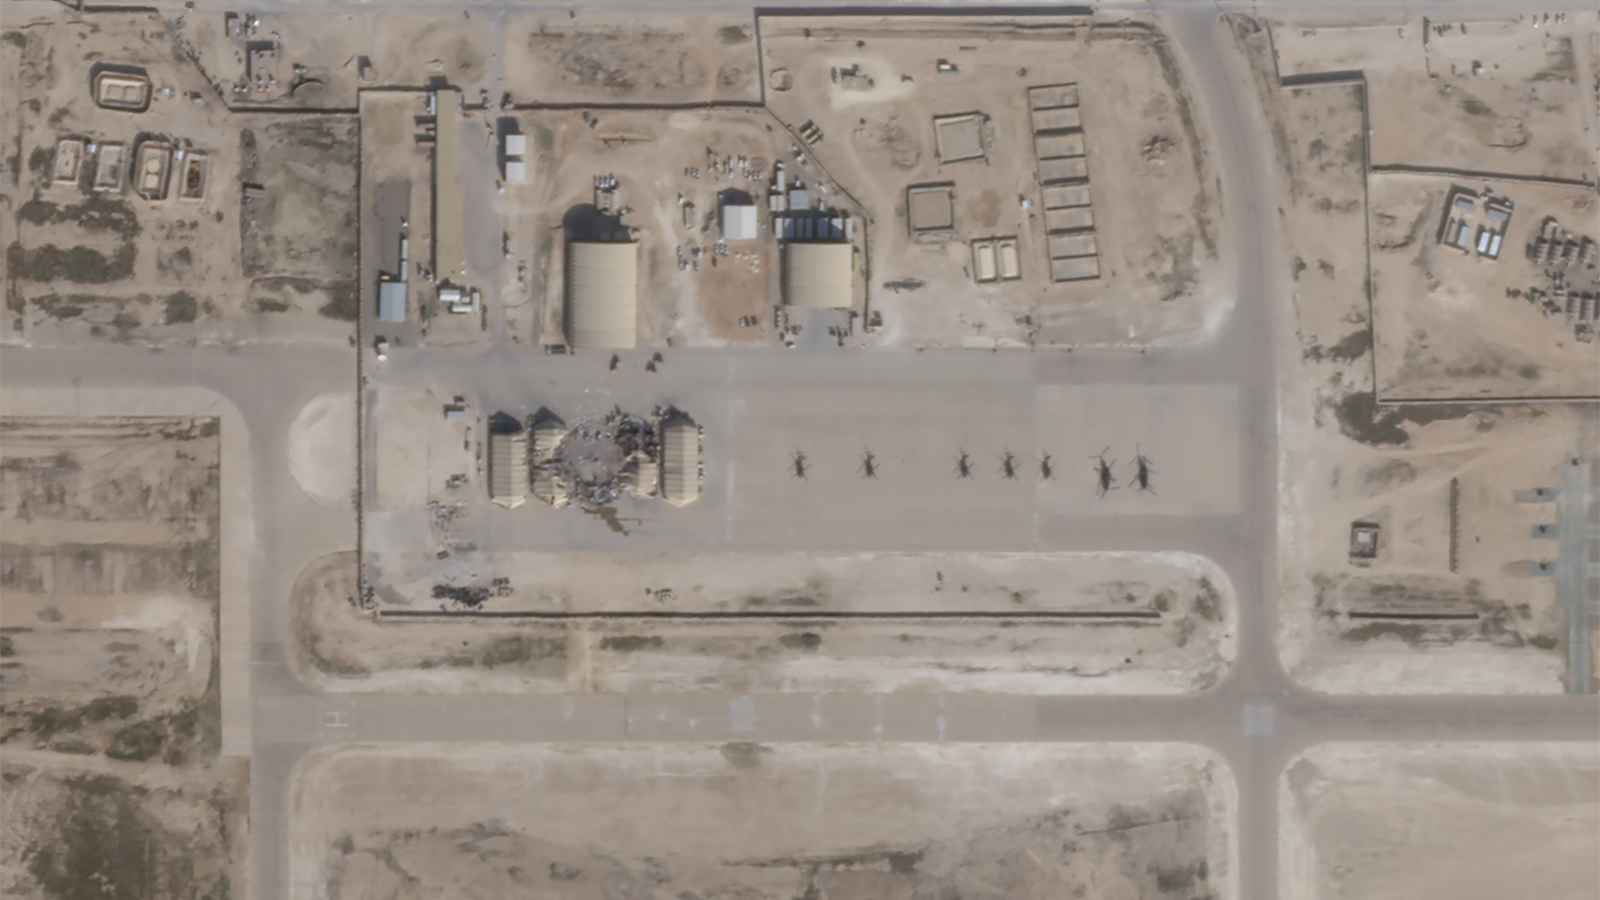 Satellite images appear to show damage from Iranian missile strikes at al Asad Air Base in Iraq on January 8.